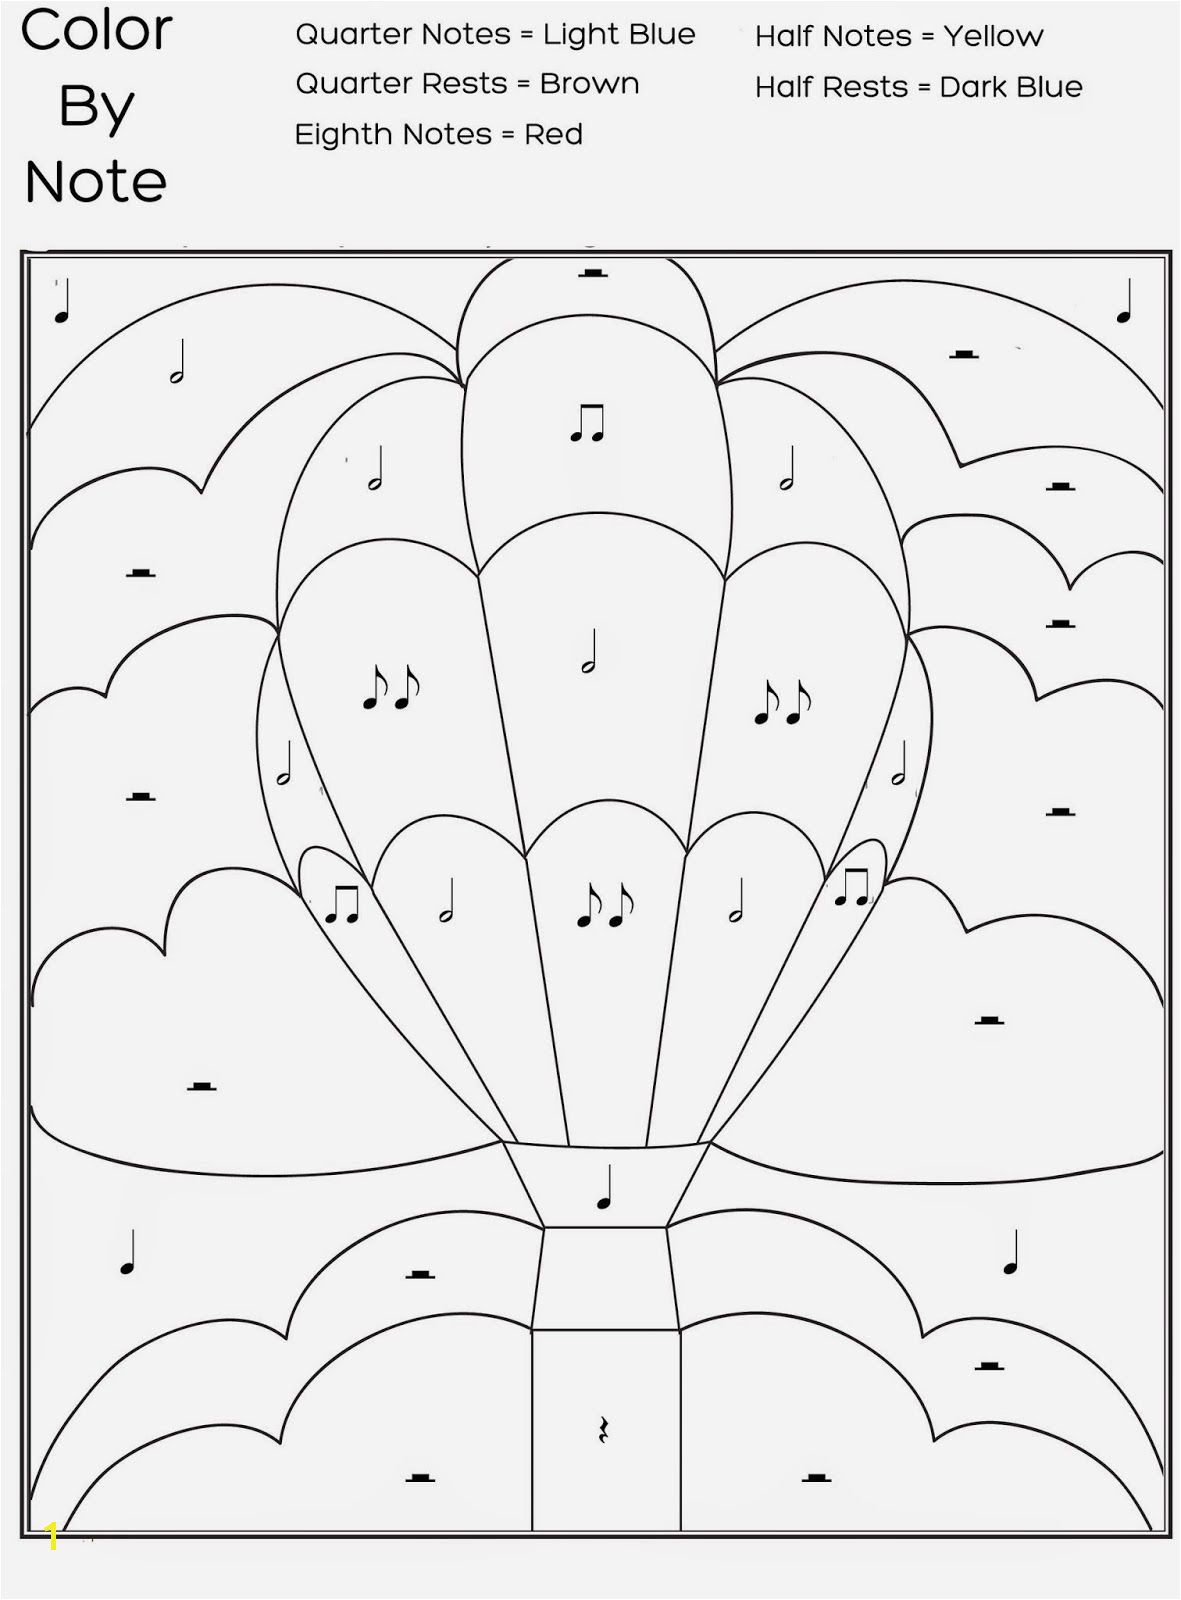 Quarter Note Coloring Page Free Printable Color by Note Worksheet